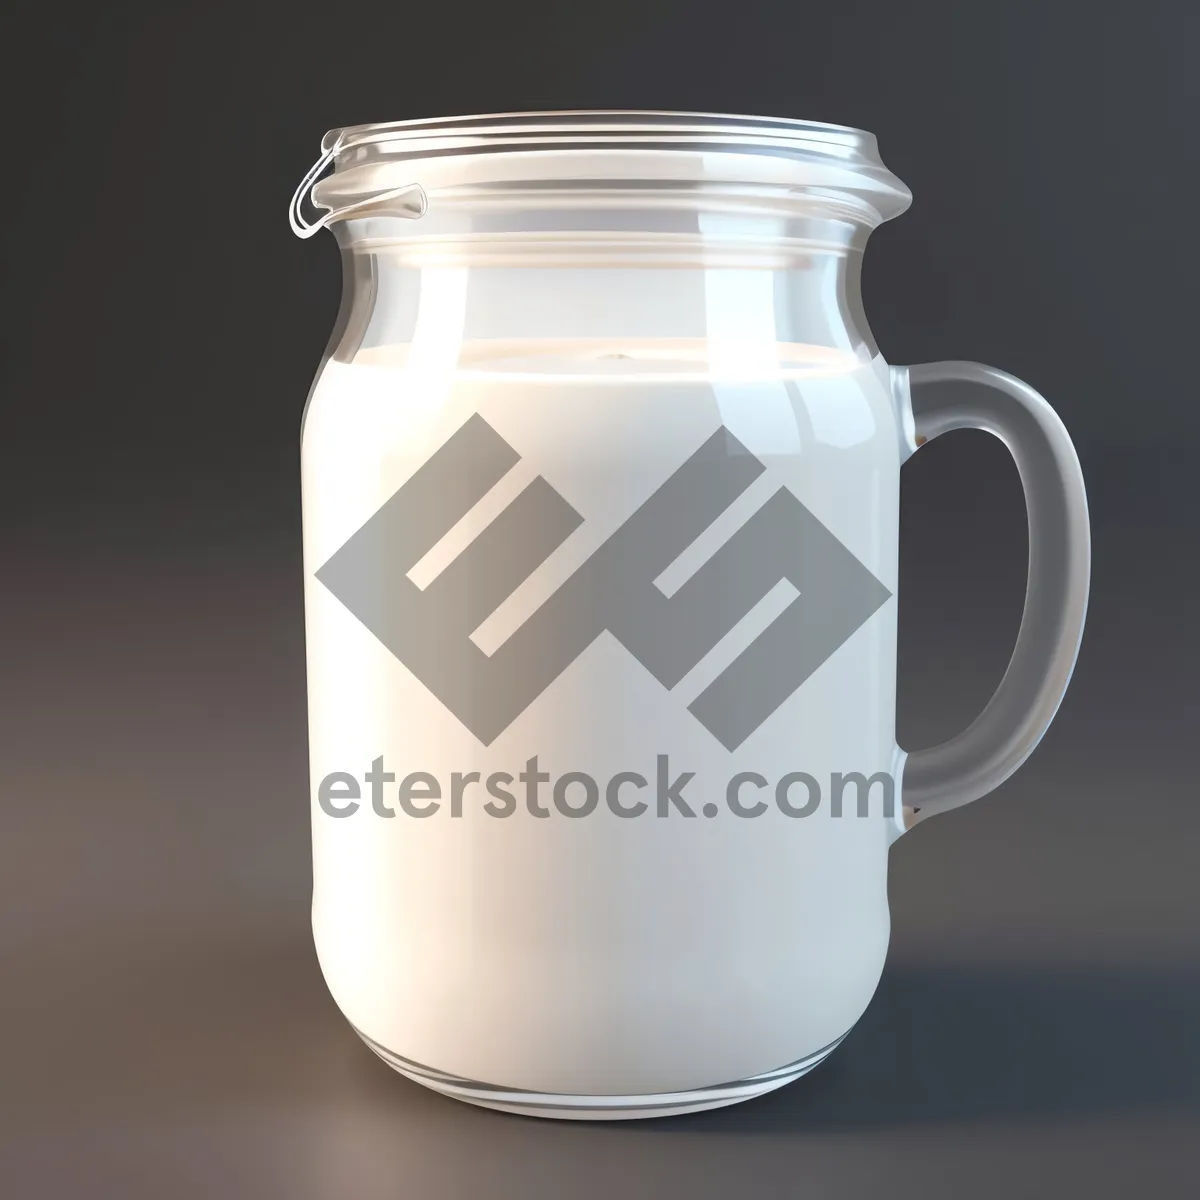 Picture of Refreshing Milk in Glass Jug